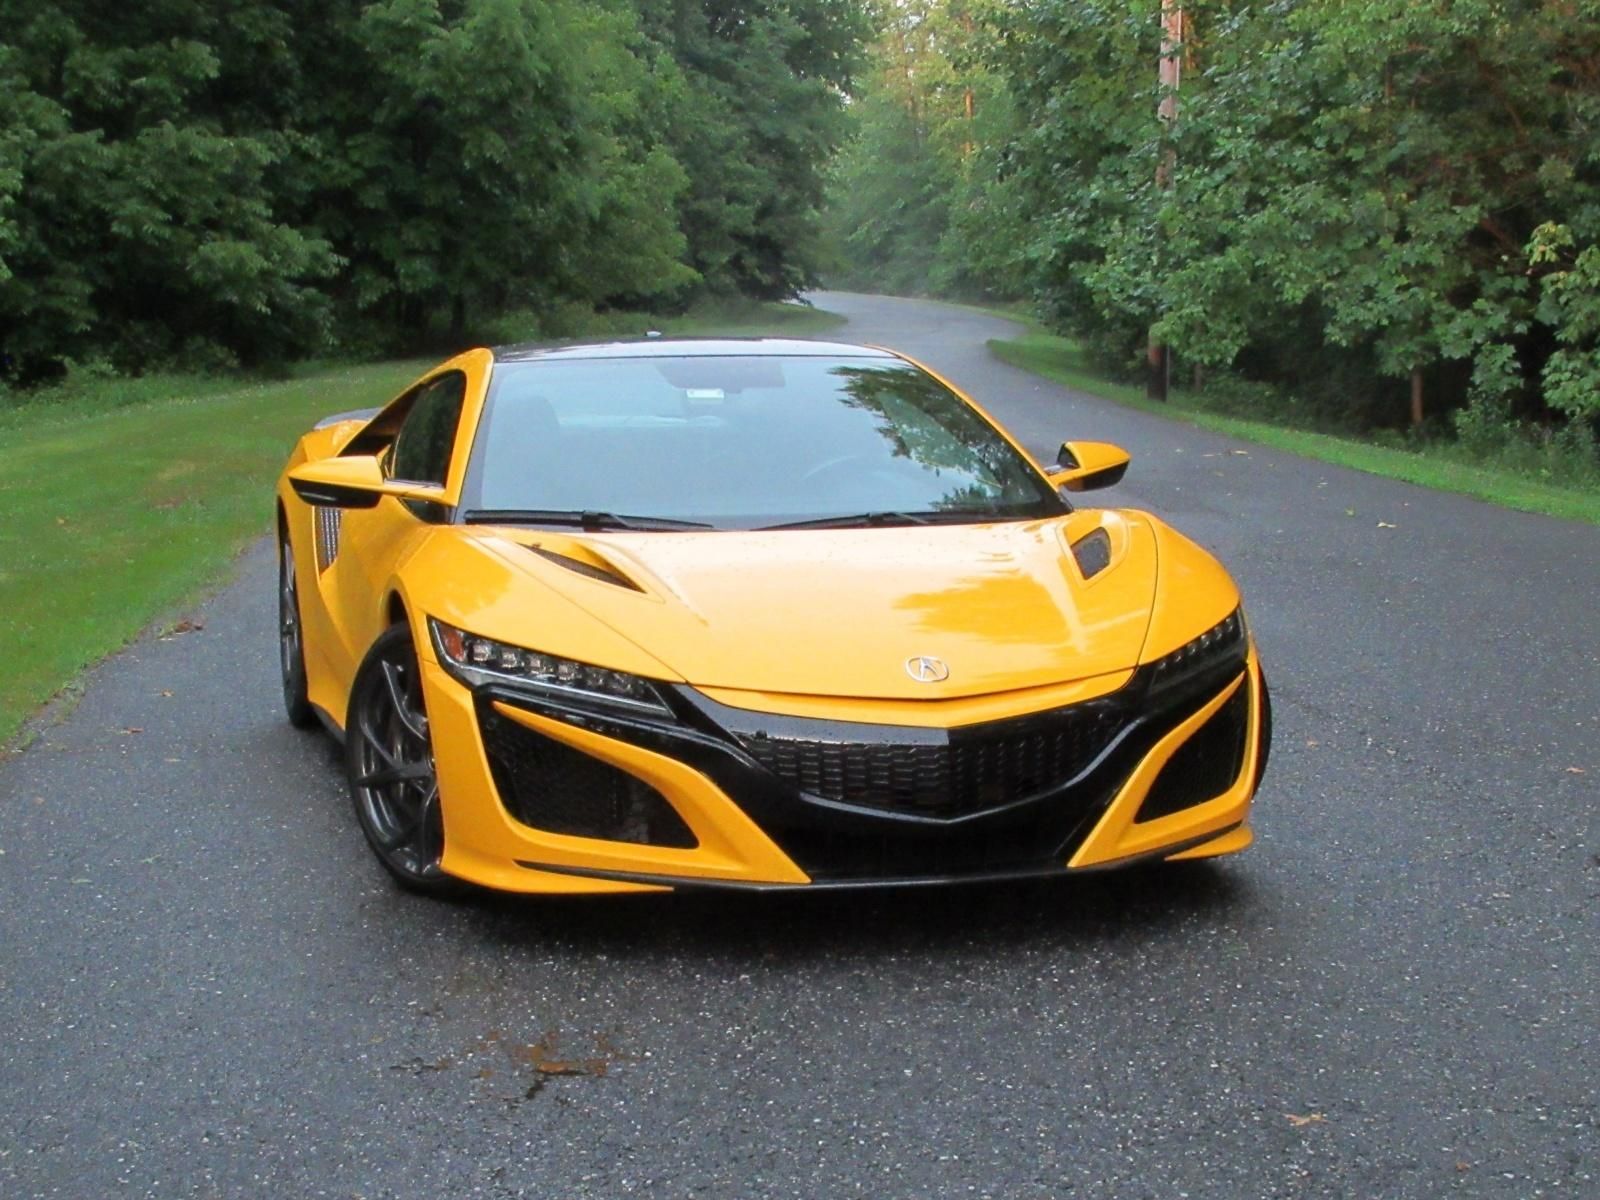 2020 Acura NSX: Sports coupe that is always ready to rumble.